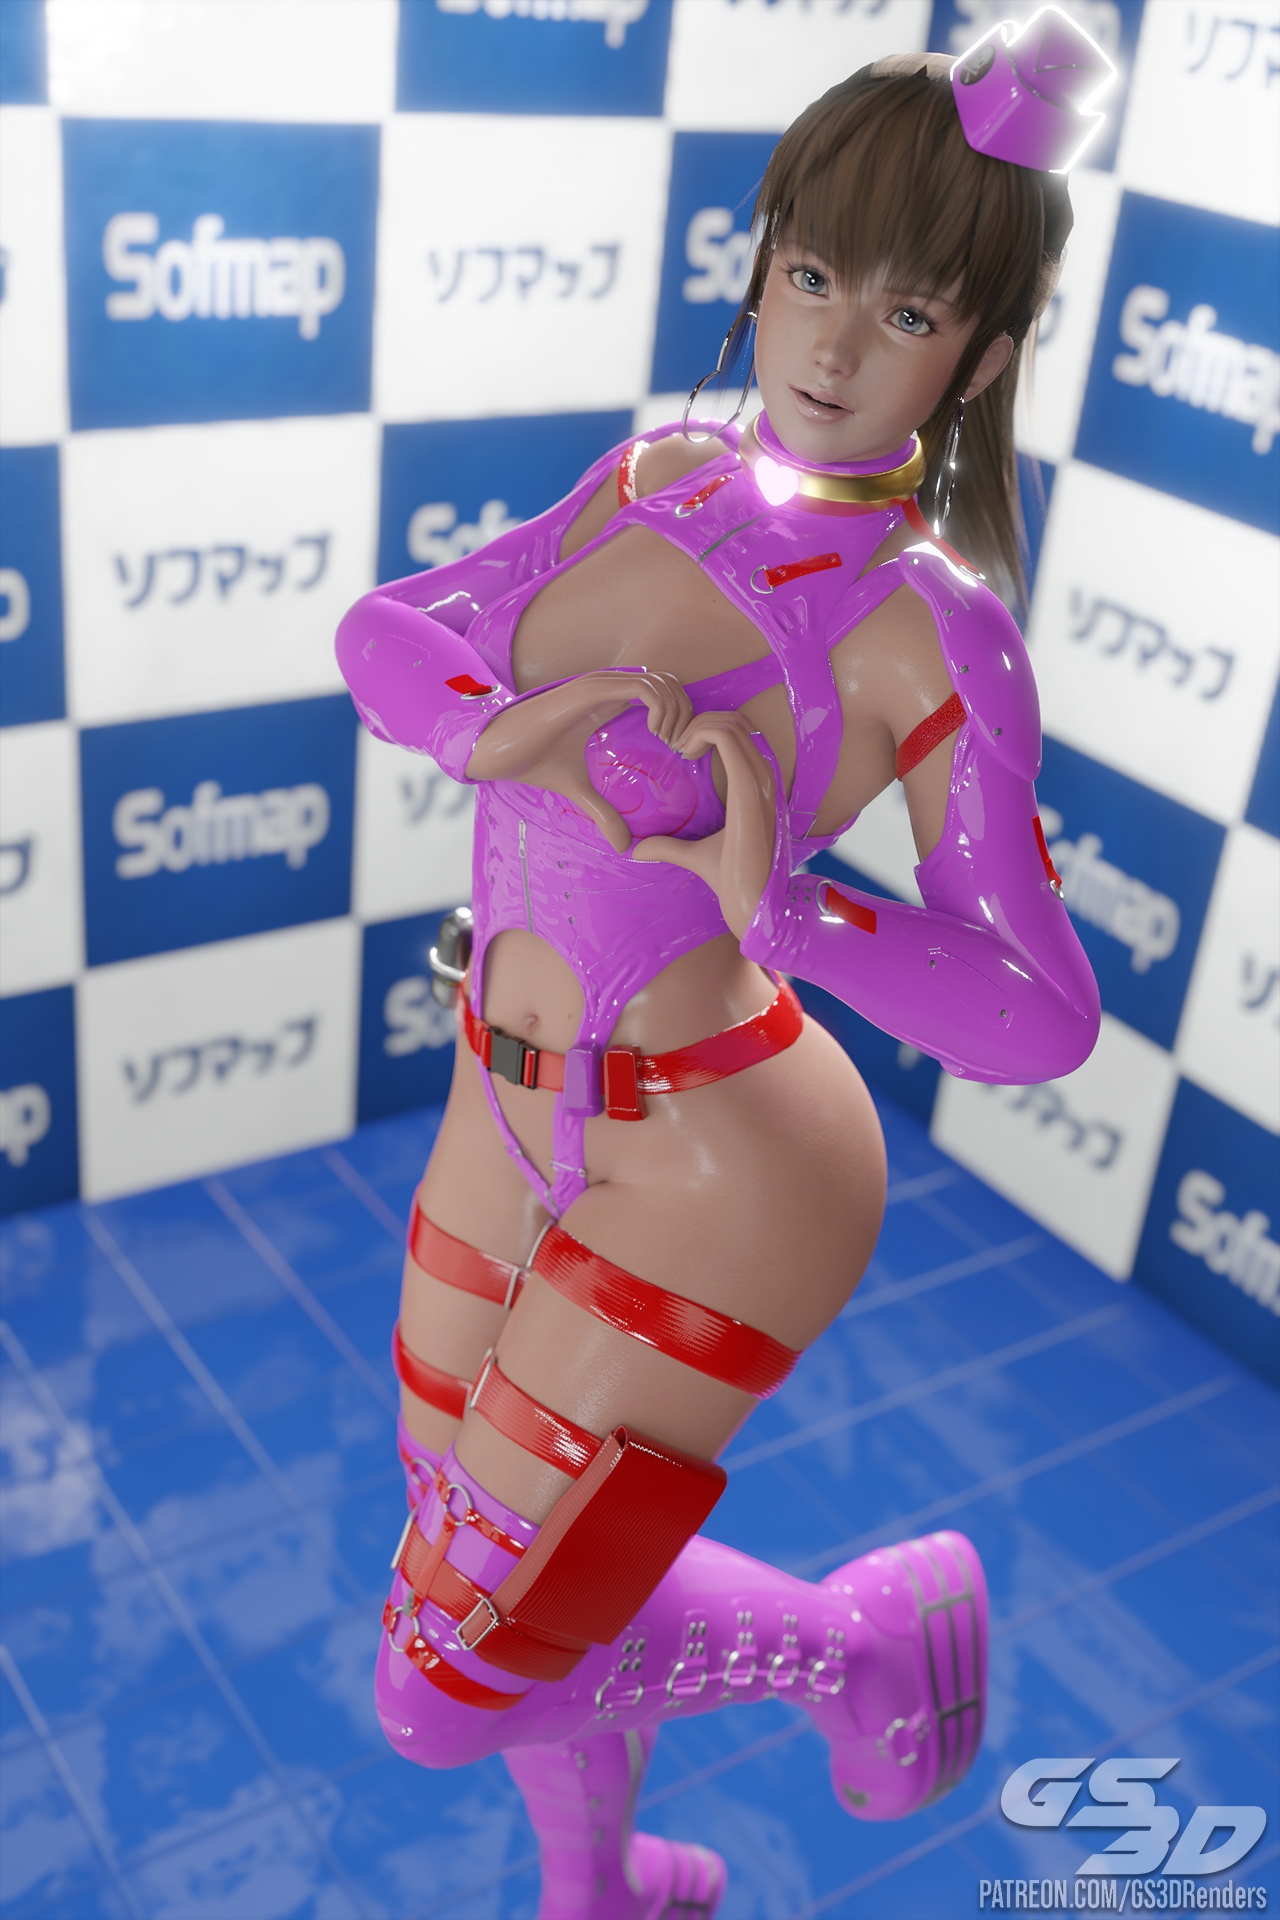 V-Day Cadet [HD] Hitomi Dead Or Alive Rubber Latex Uniform Outfit Cosplay Blender3d Neko Cat Ears Headset Valentine's Day Boots